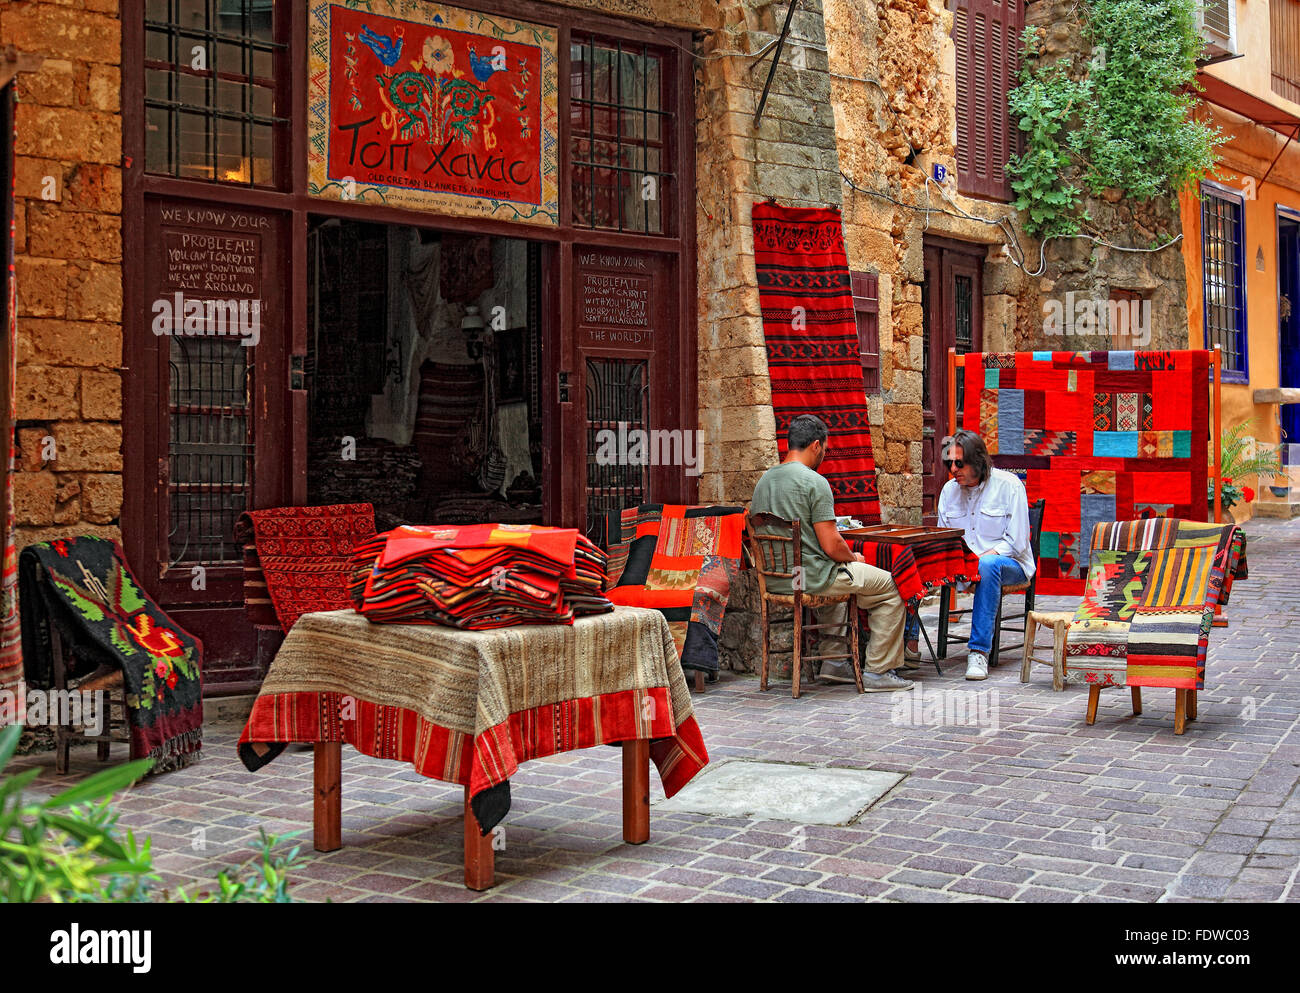 Crete, in the Old Town of Chania, business with textiles, carpets Stock Photo